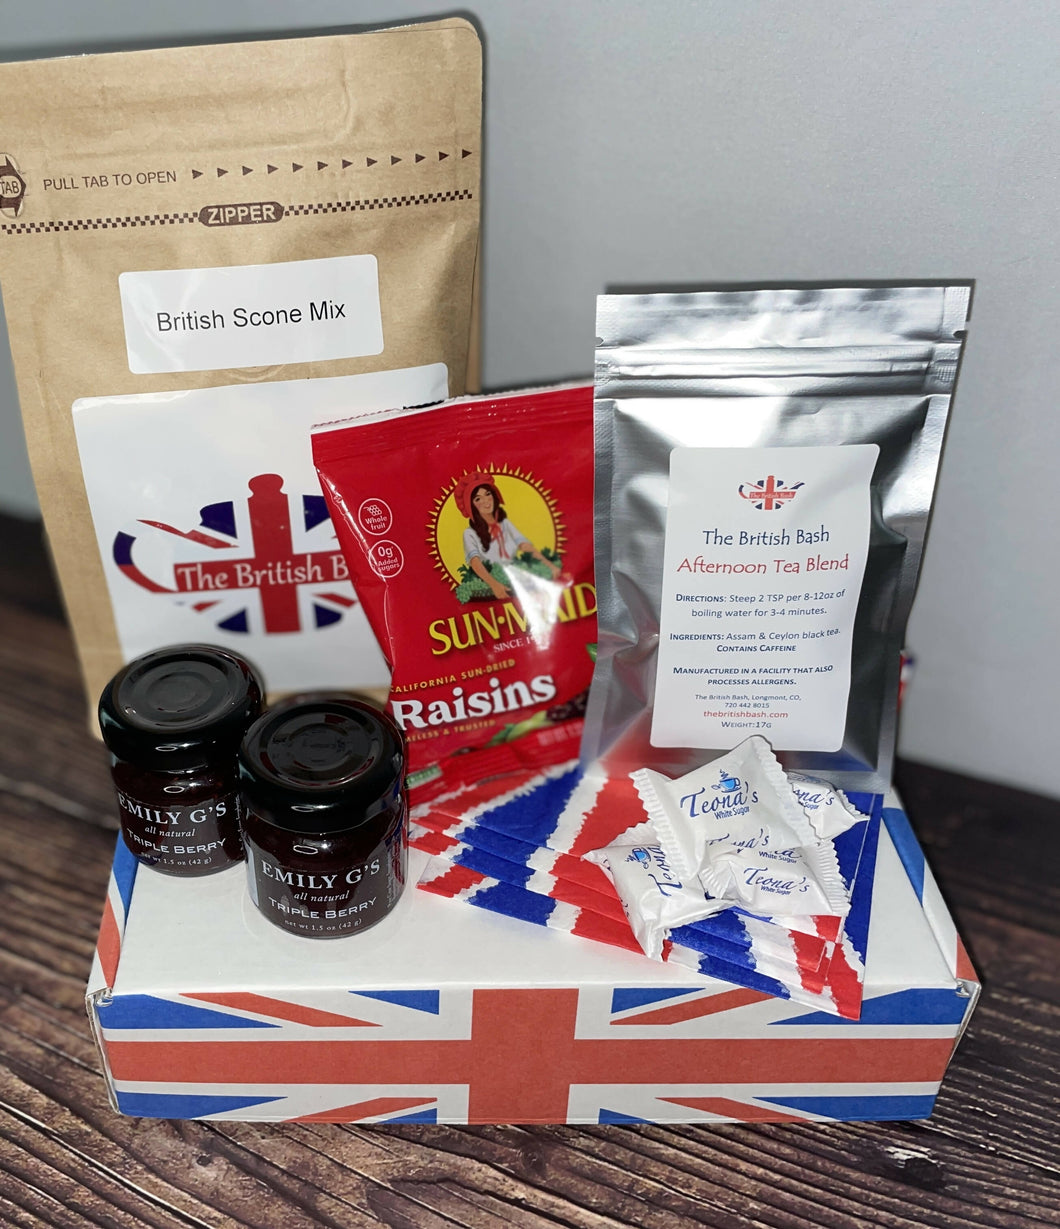 Cream Tea Baking Kit - Hold your own British style cream tea party and celebrate with a much loved tradition from Great Britain.